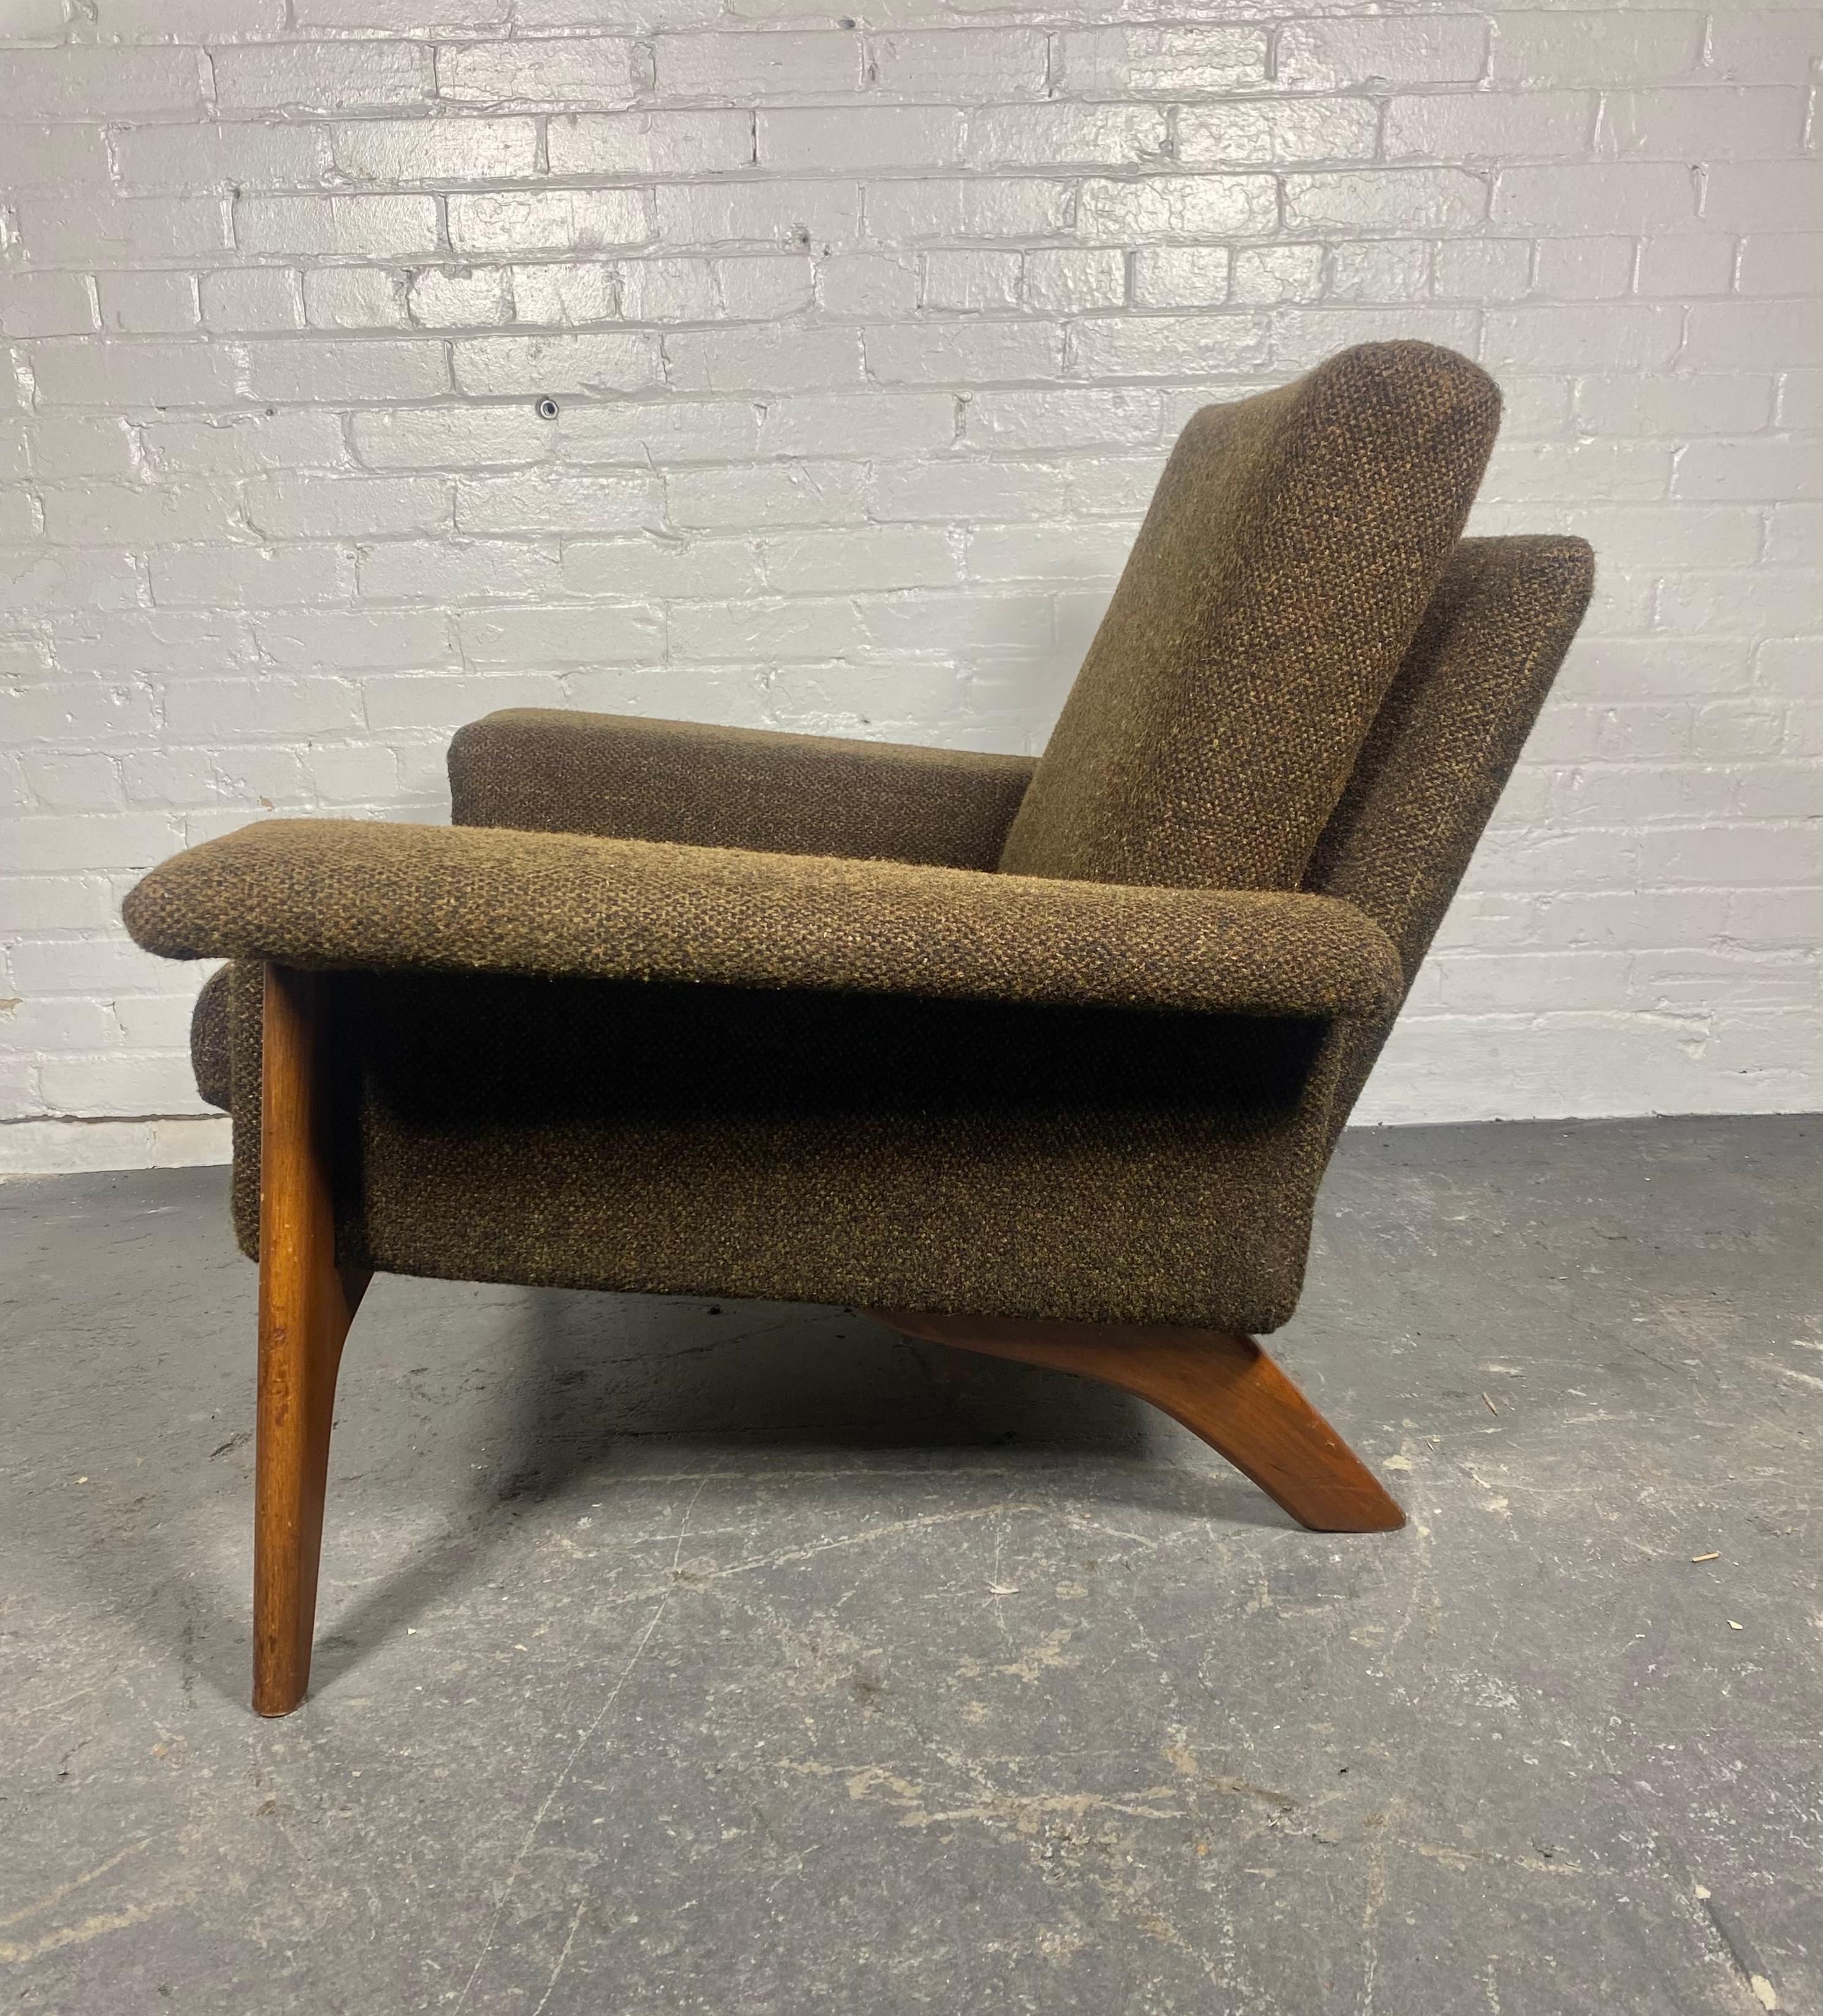 Fabric Dramatic Modernist Lounge Chair by Adrian Pearsall.Sculptural Walnut Base.